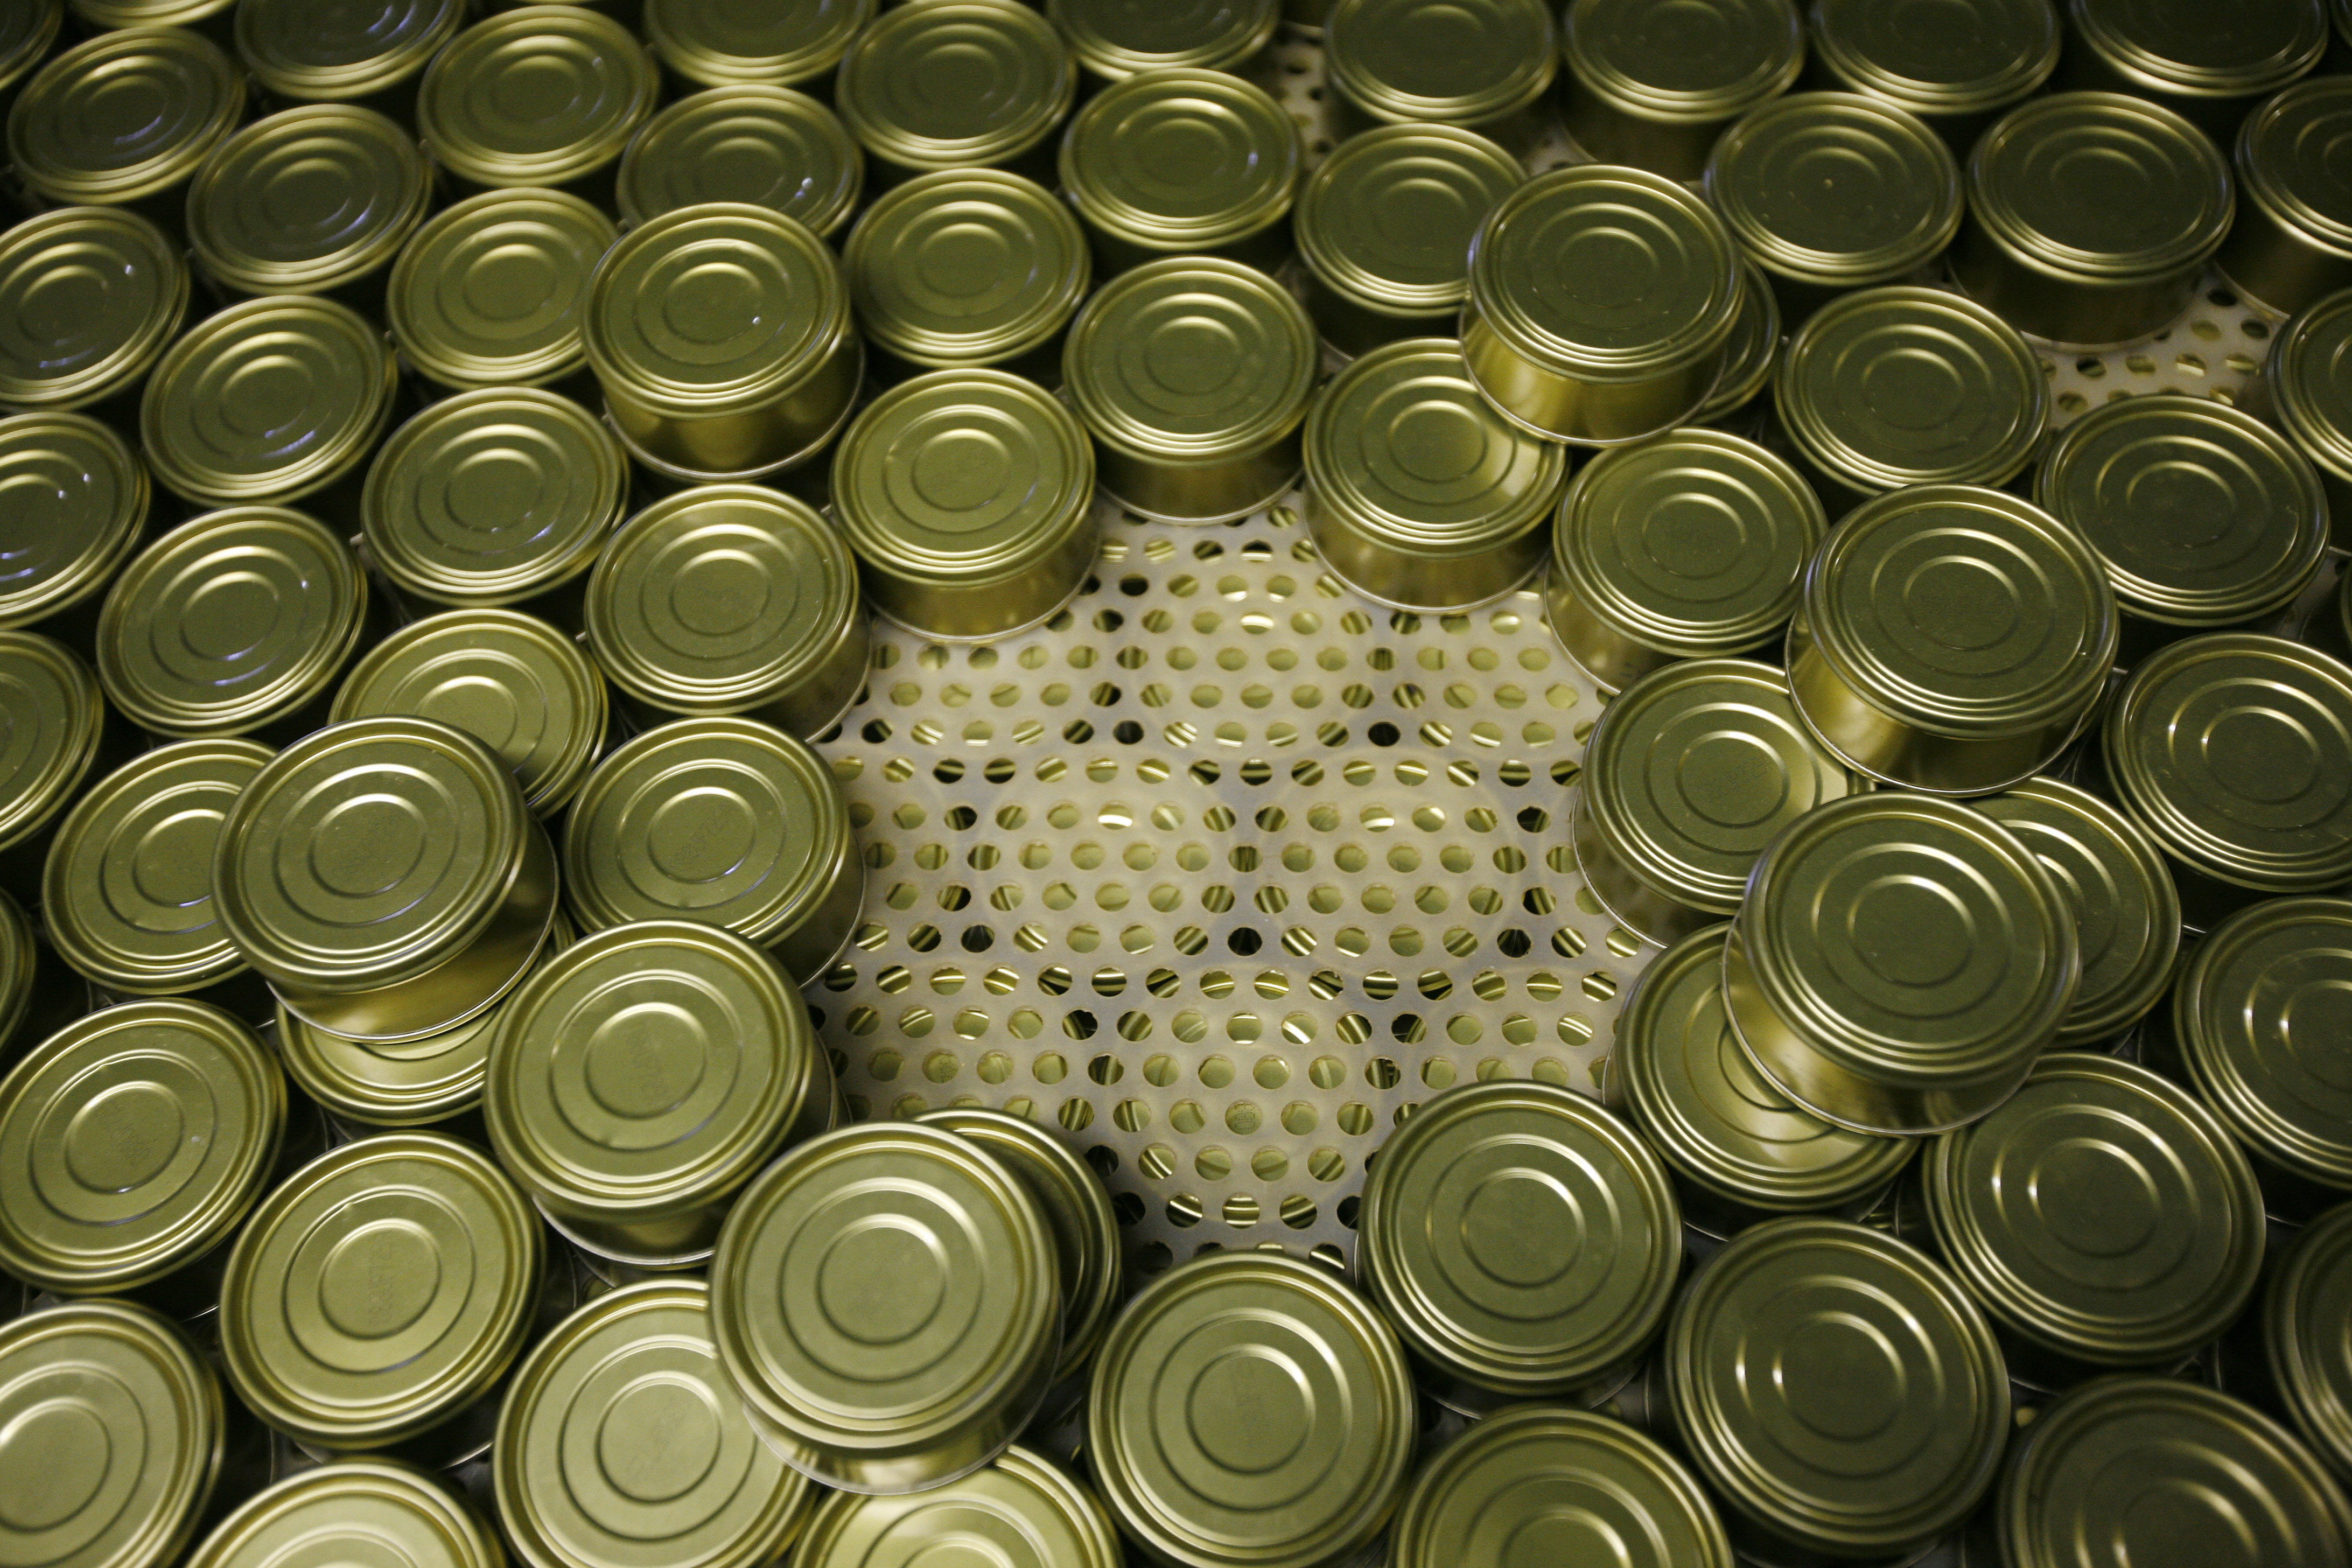 Cans of pink salmon are stacked so that the heat can vent out of the stack after being cooked at the Alitak Cannery in Alitak, Alaska